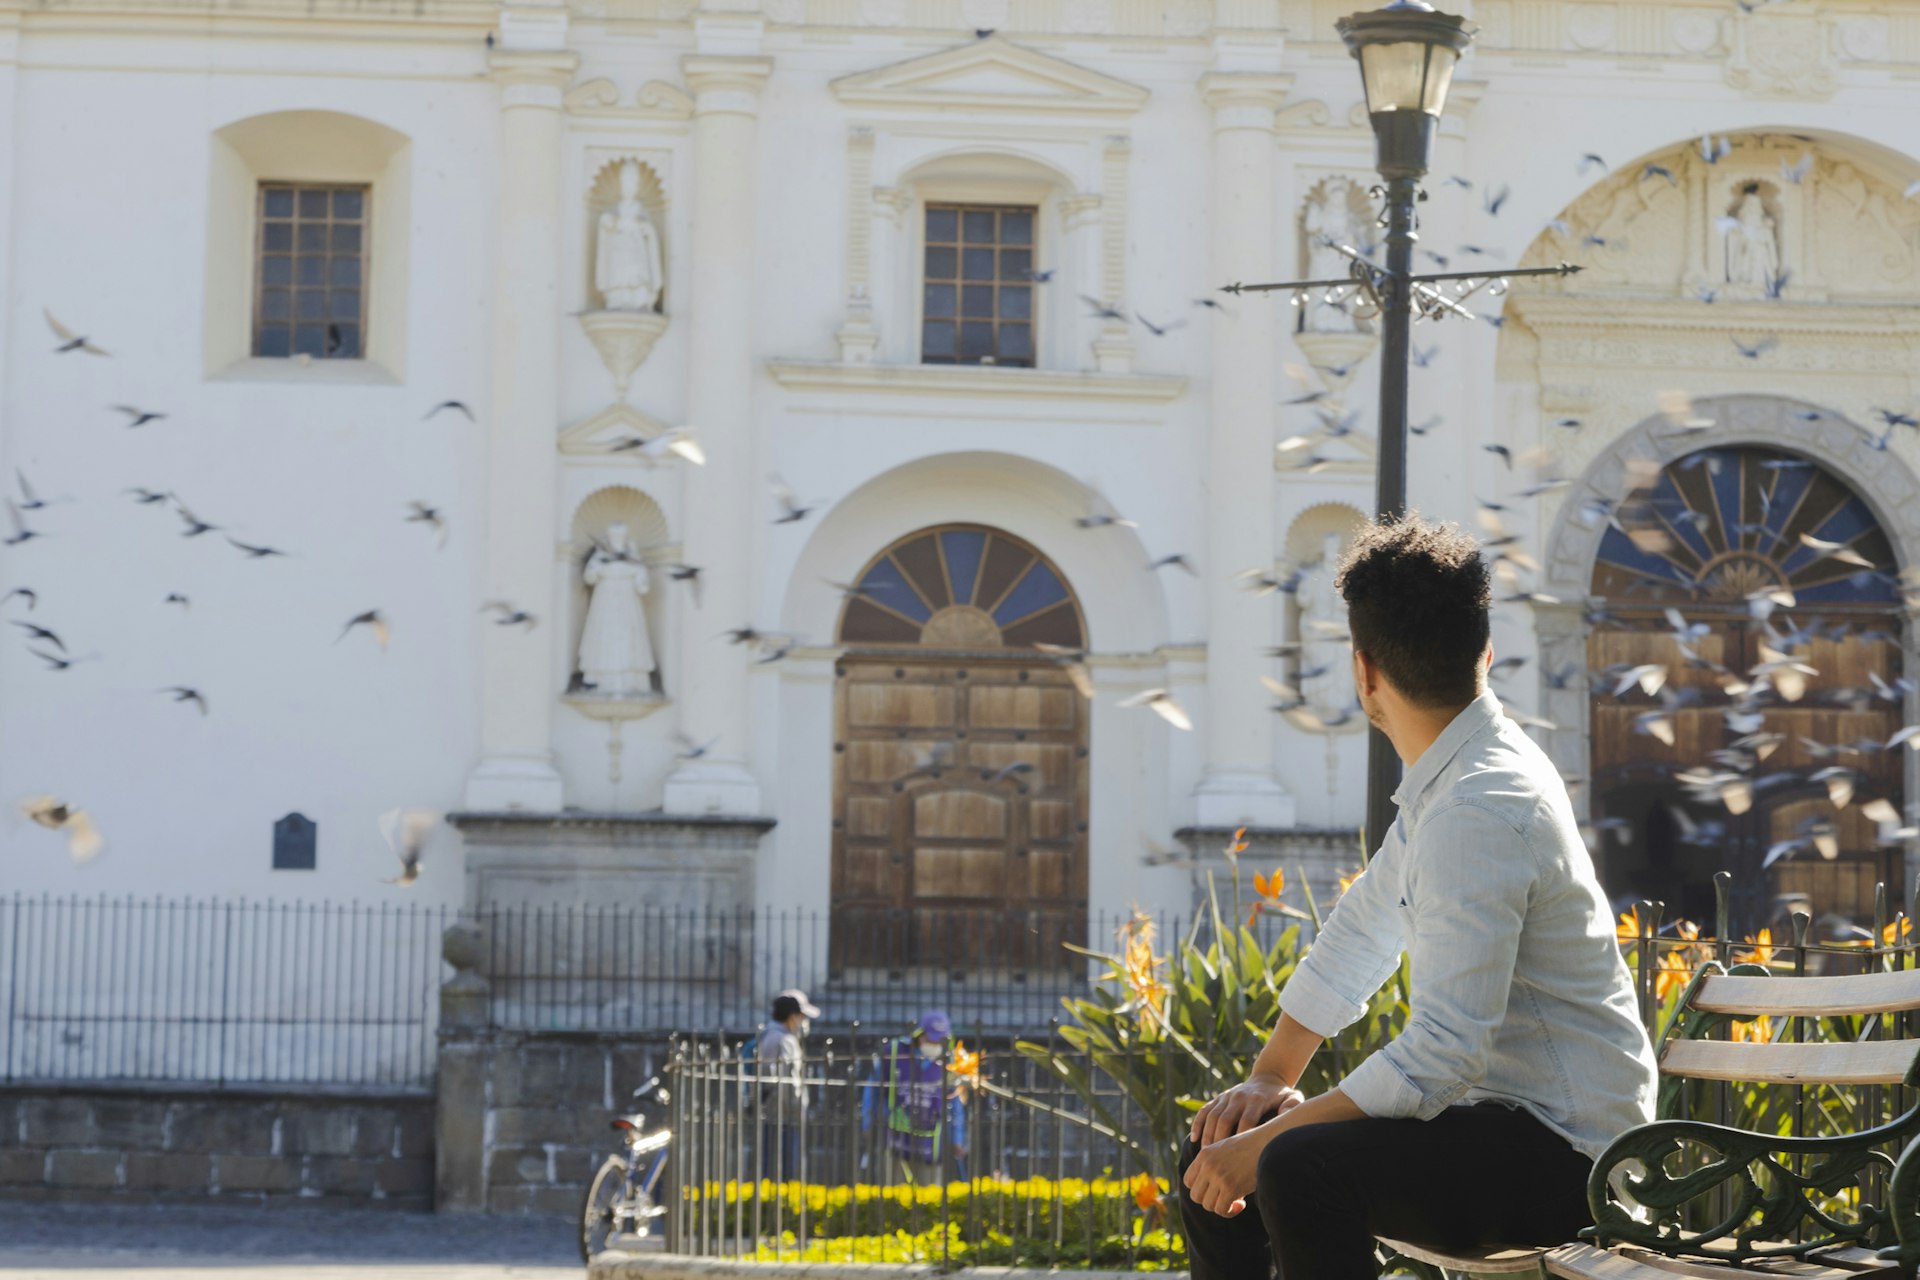 A Hispanic young man sits in front of a cathedral in Antigua, Guatemala, watching pigeons fly over the church